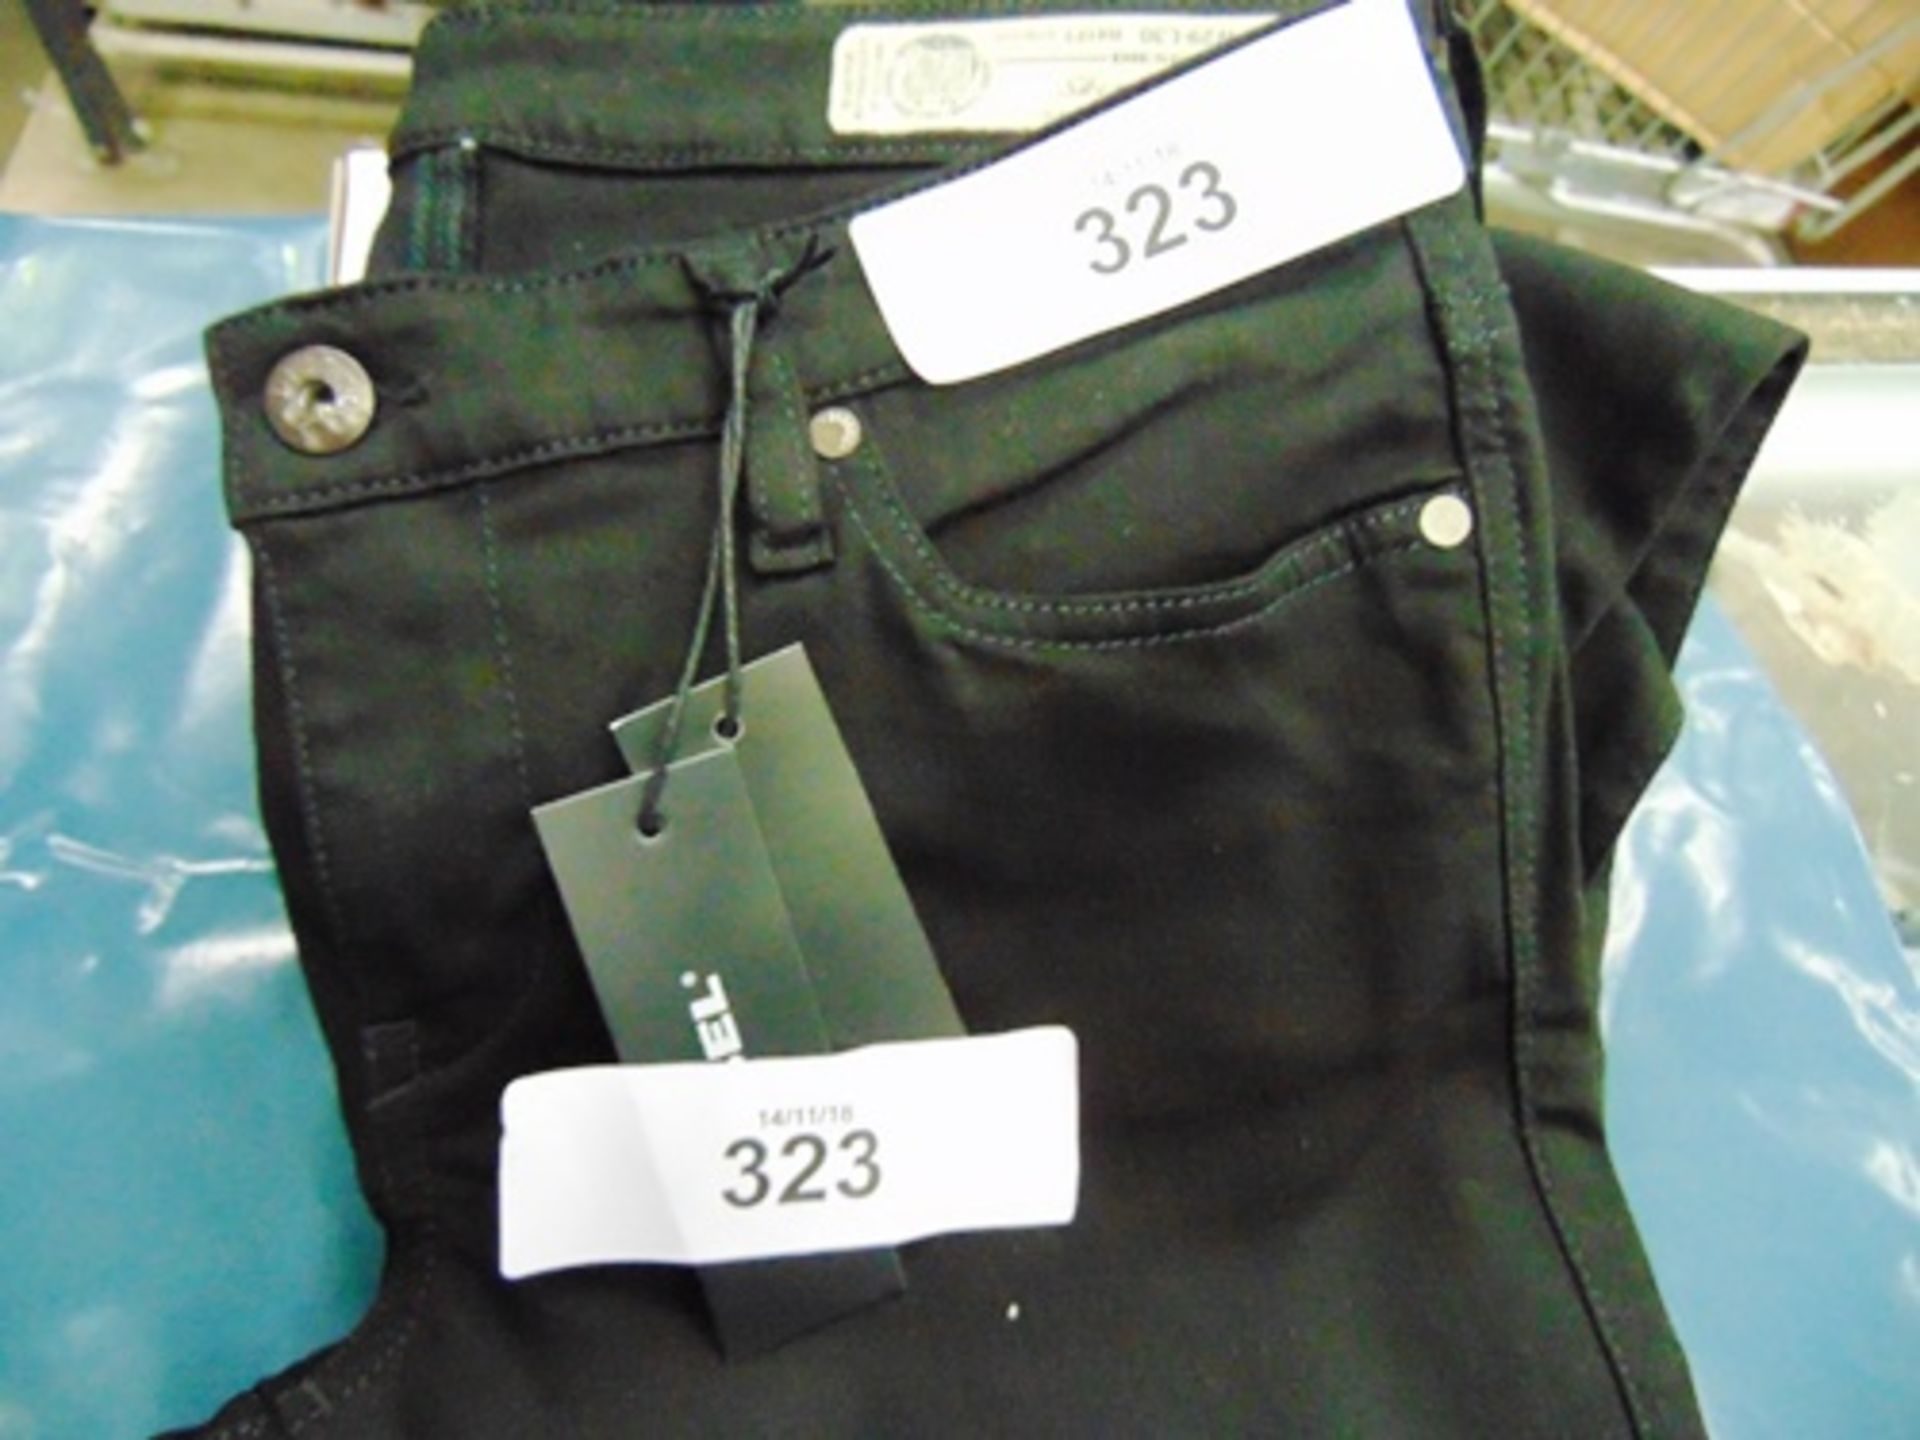 1 x pair of Diesel skinzee low, L.30 trousers, size 29, length 30, RRP £80 - New with tags (CC1)